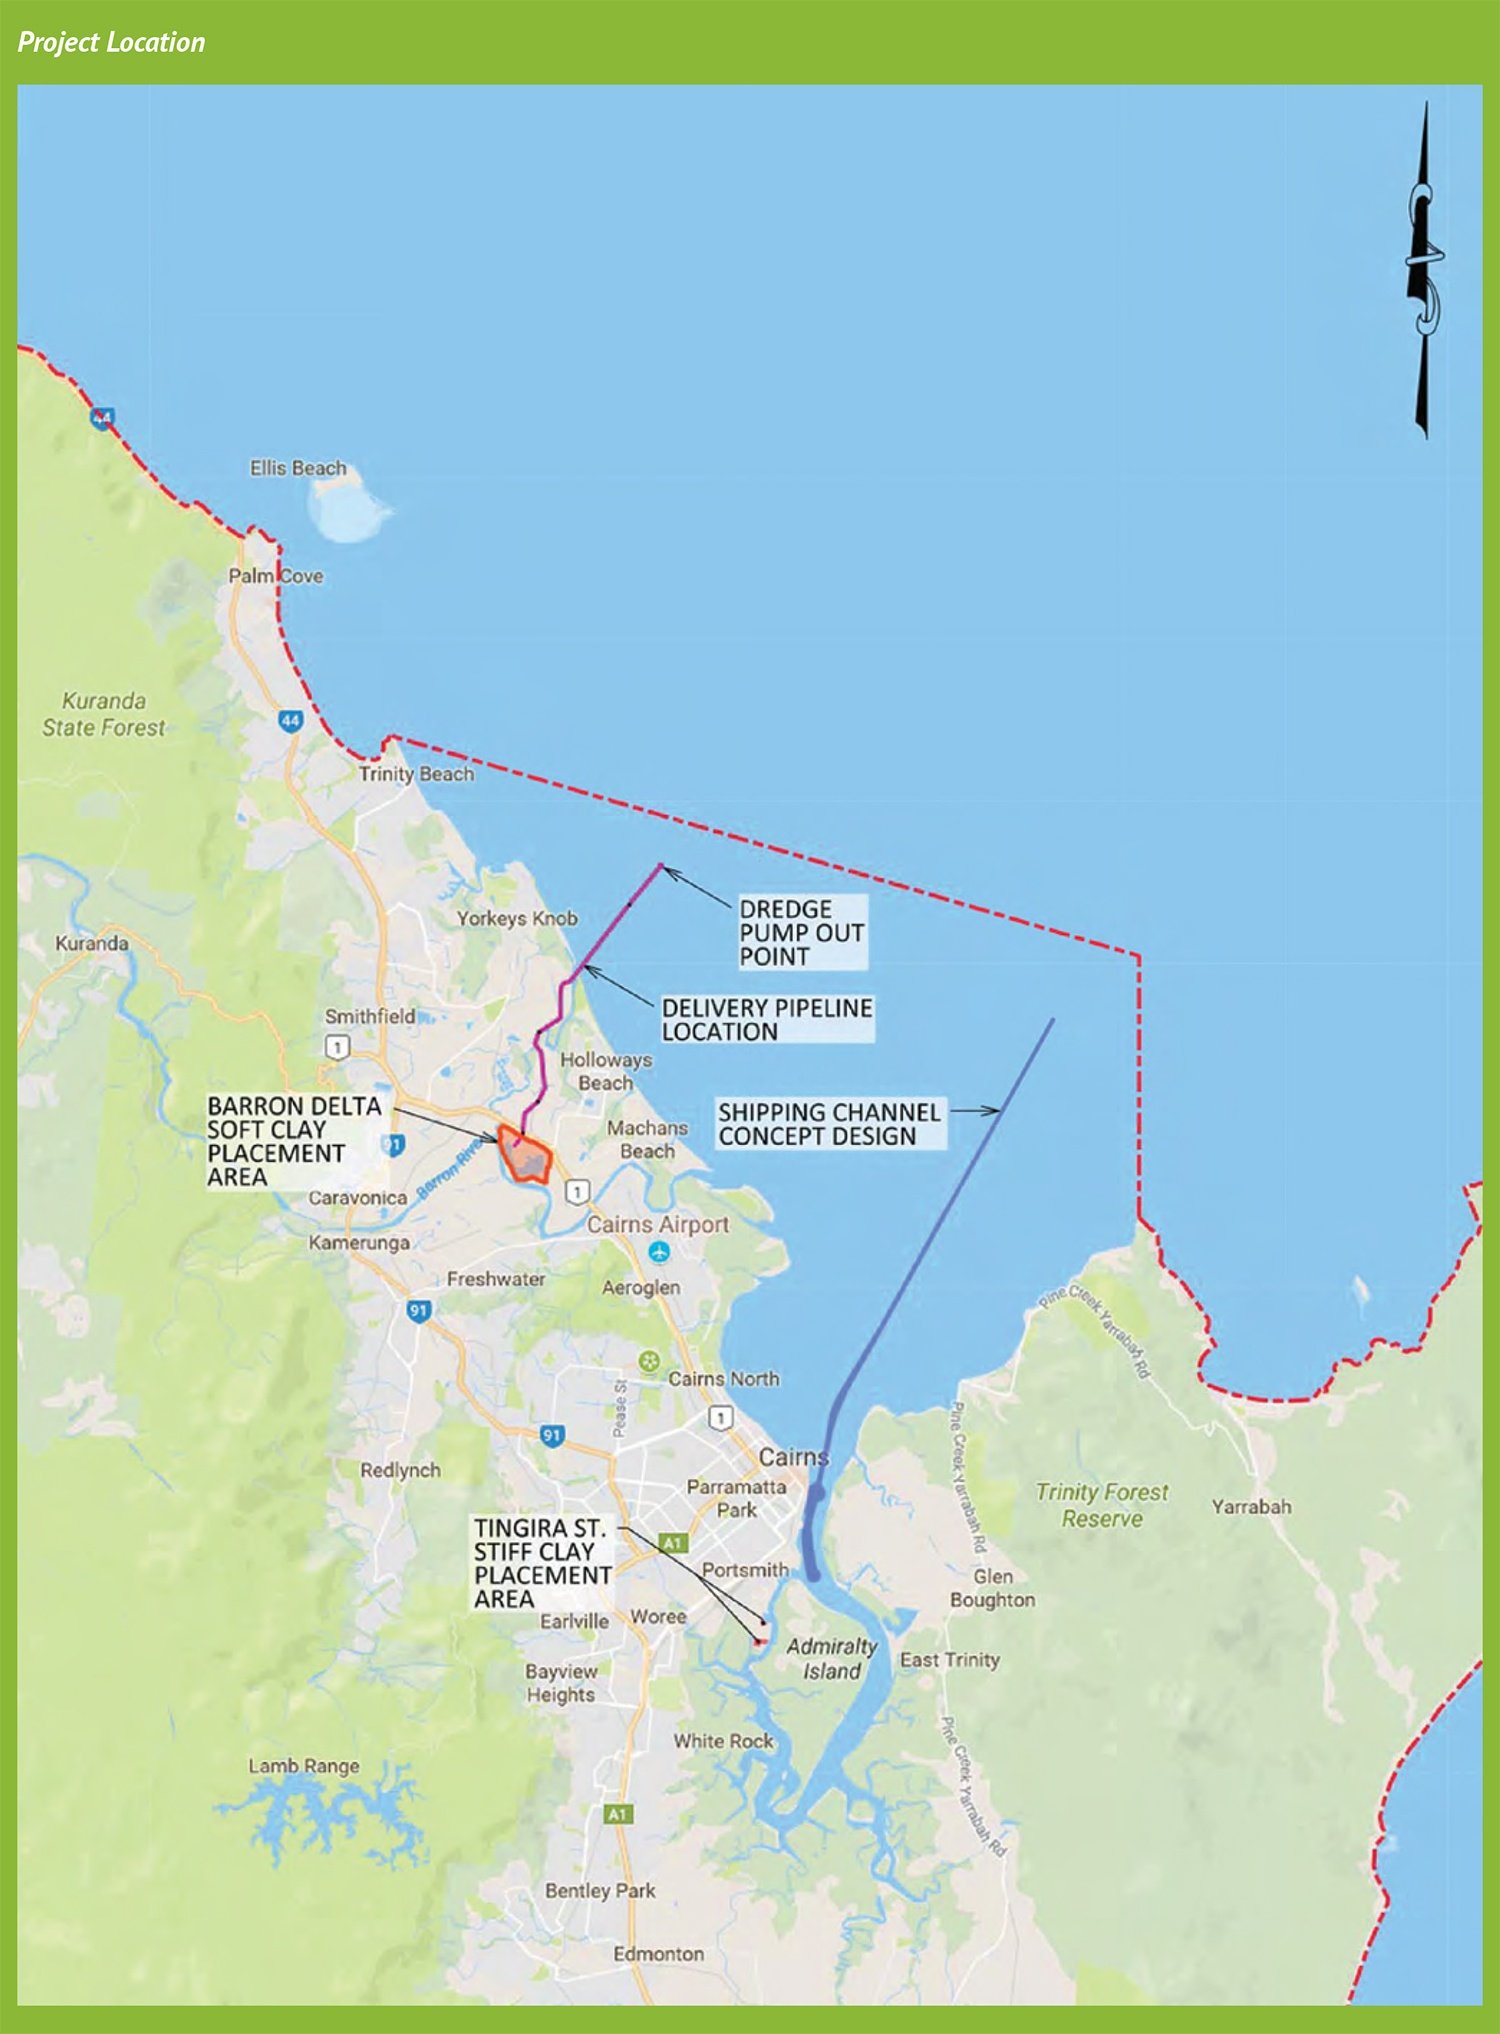 cairns-shipping-development-project-location